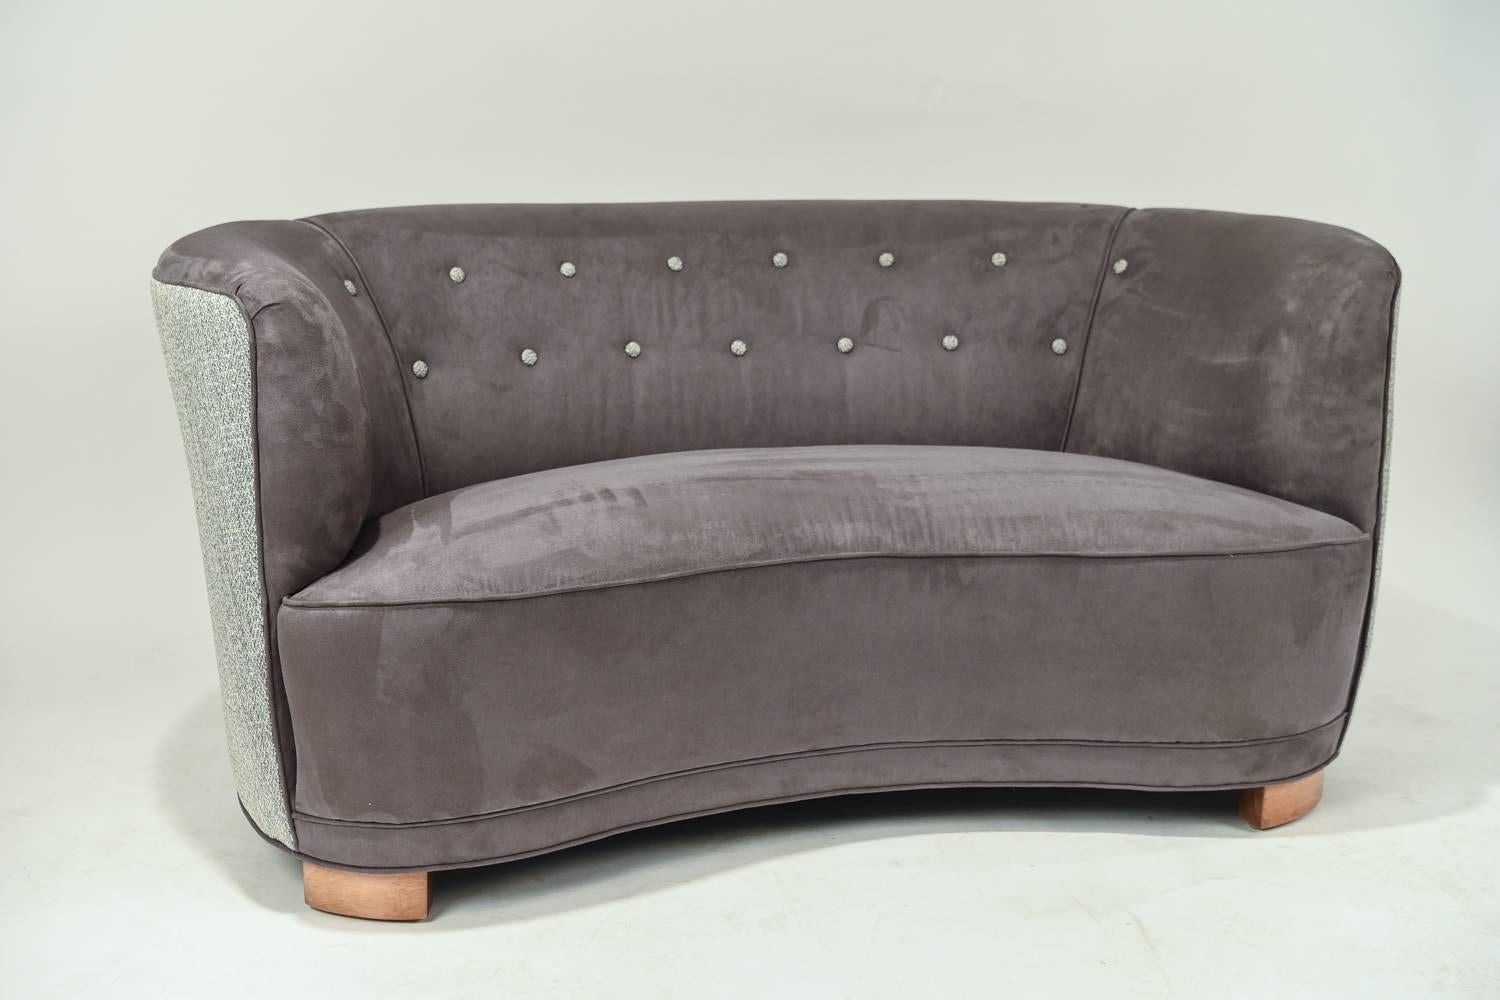 This Danish banana sofa or loveseat seats two people with ease. From the Art Deco period, this sofa originates circa 1940s, but the design remains popular today. This sofa sits upon short wooden feet, which allows for the body of the sofa to be the